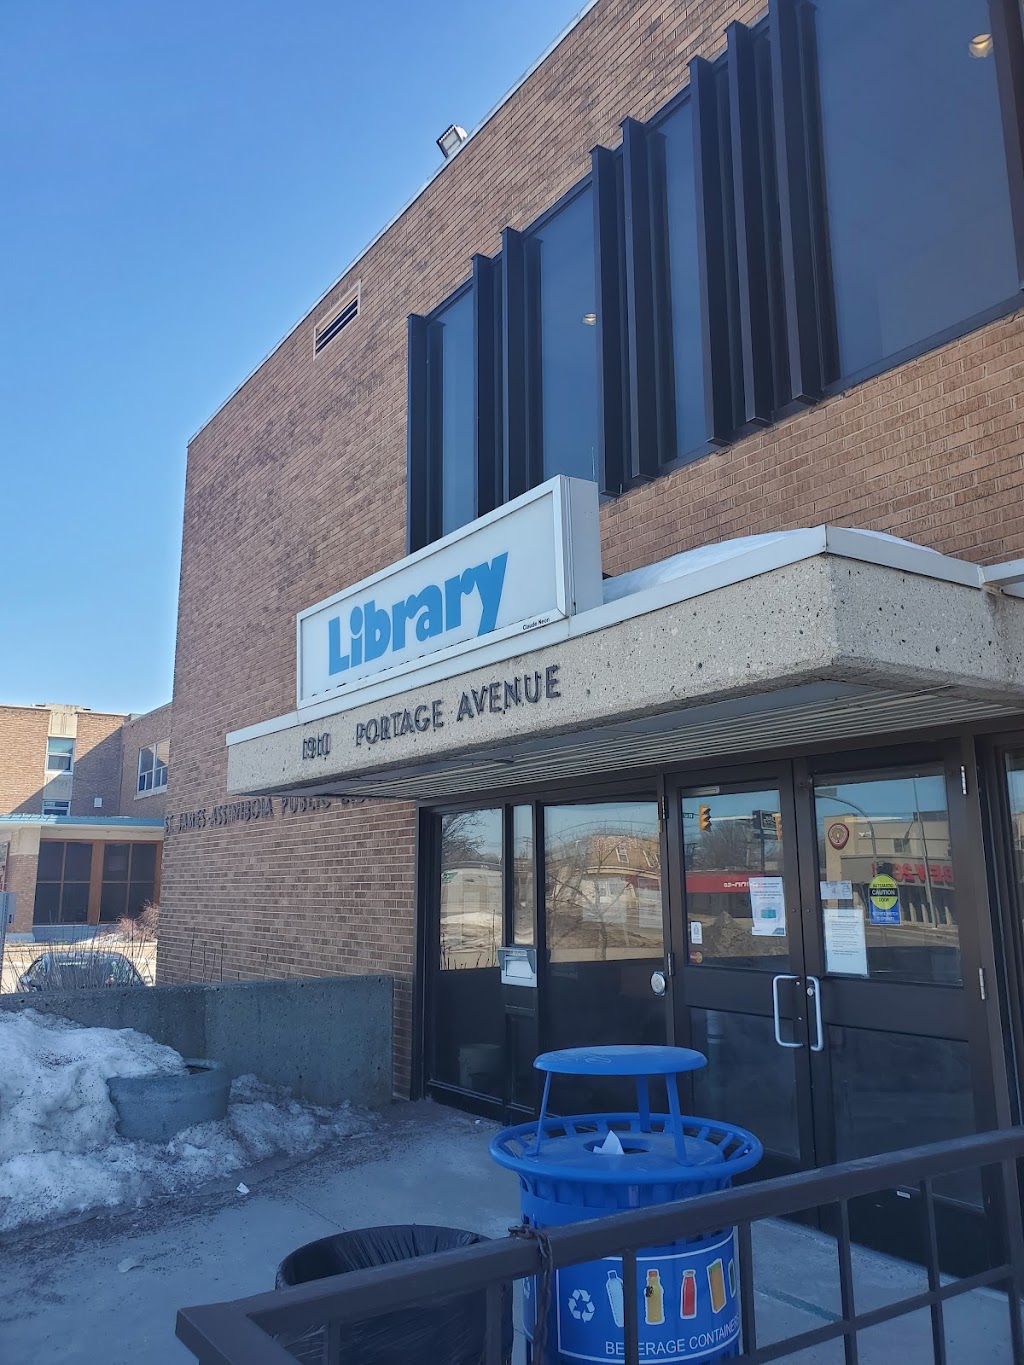 St James-Assiniboia Library | library | 1910 Portage Ave, Winnipeg, MB R3J 0J2, Canada | 2049865583 OR +1 204-986-5583